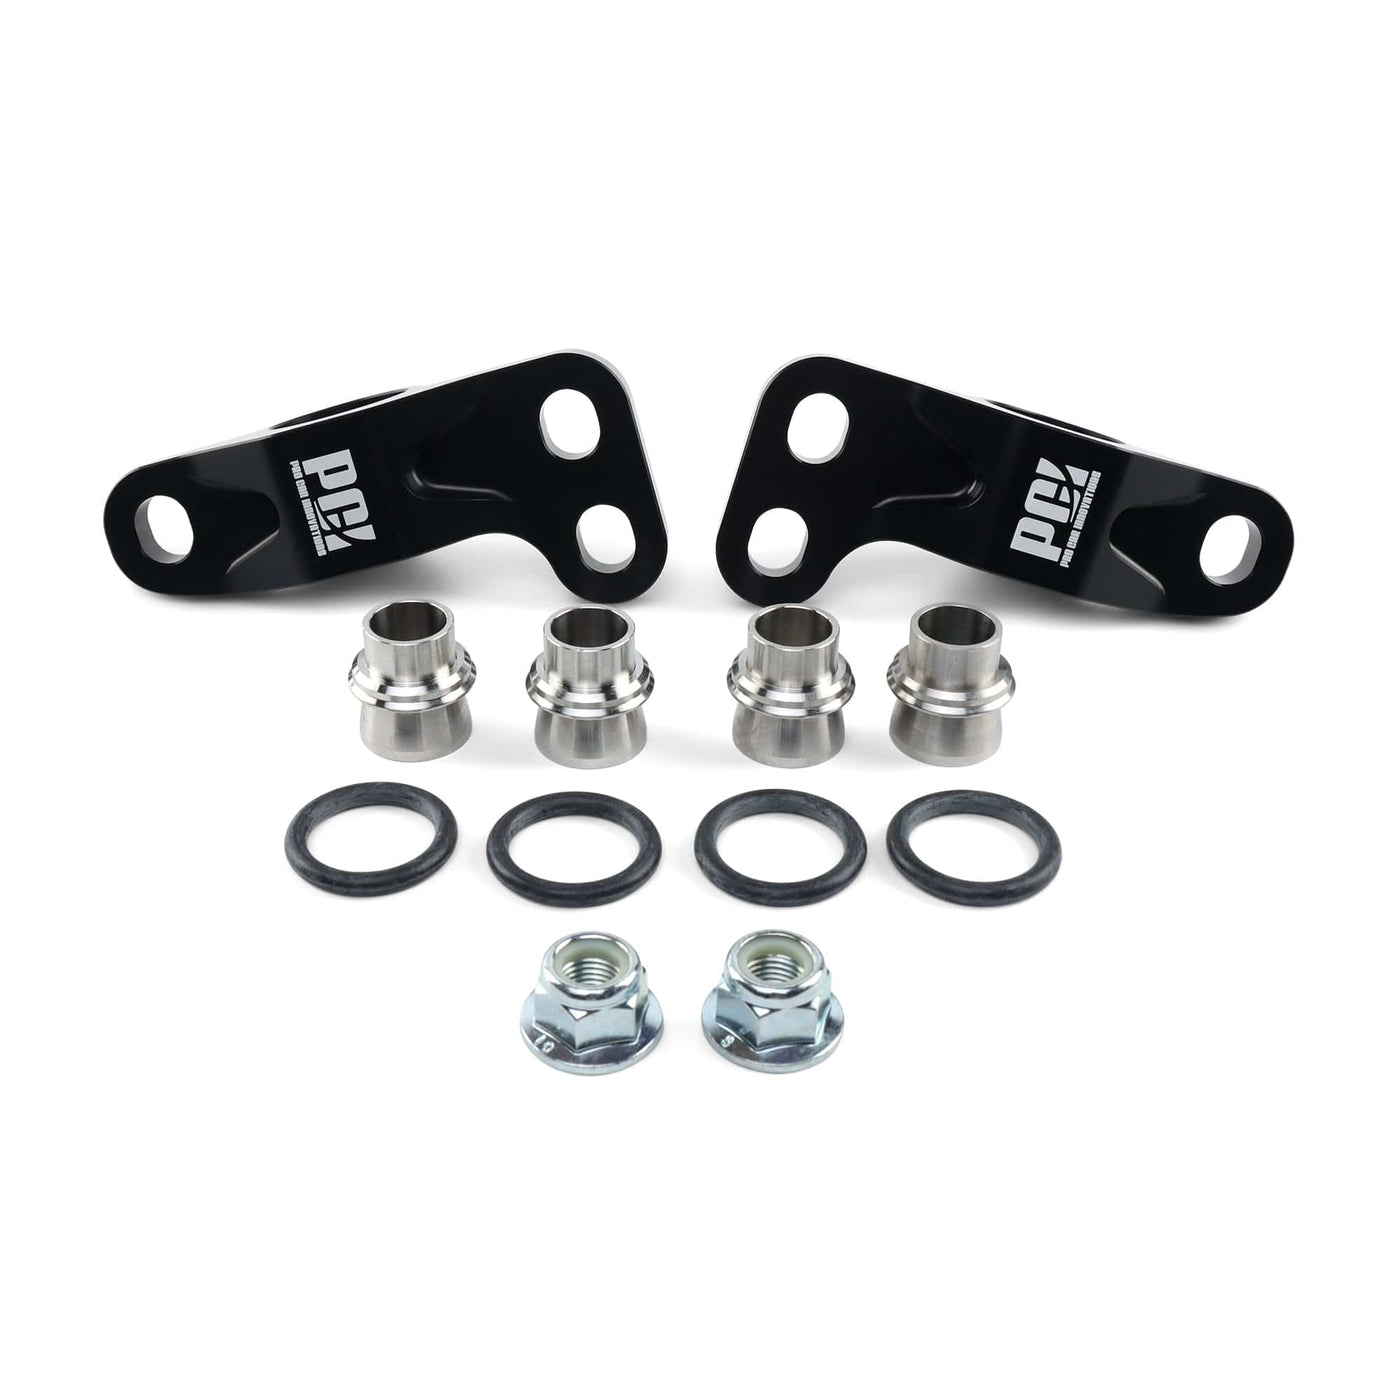 Pro Car Innovations (PCI) PCI 96-00 CIVIC Aluminum Front Lower Compliance Spherical Bearing Kit